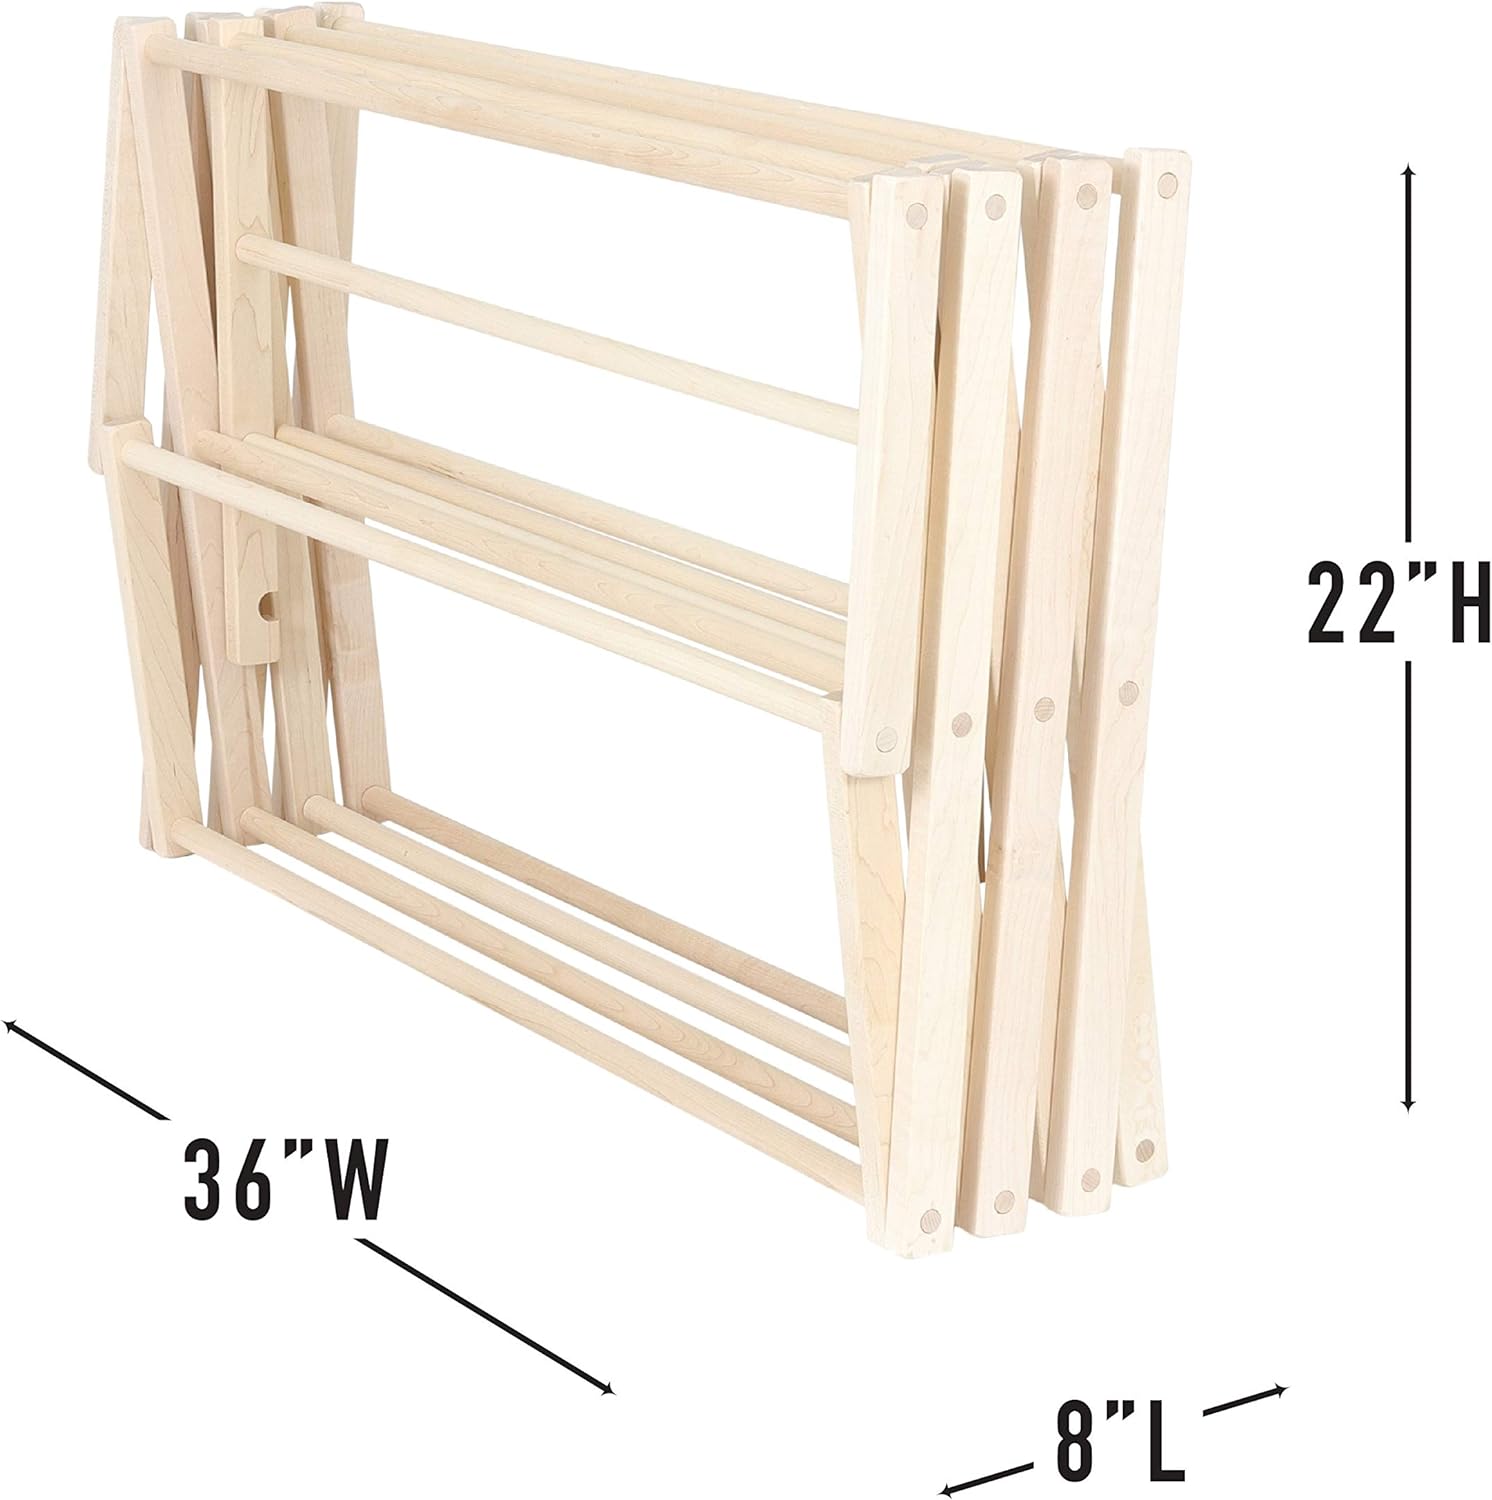 Pennsylvania Woodworks Clothes Drying Rack: Solid Maple Hard Wood Laundry  Rack for Sweaters, Blouses, Lingerie & More, Durable Folding Drying Rack